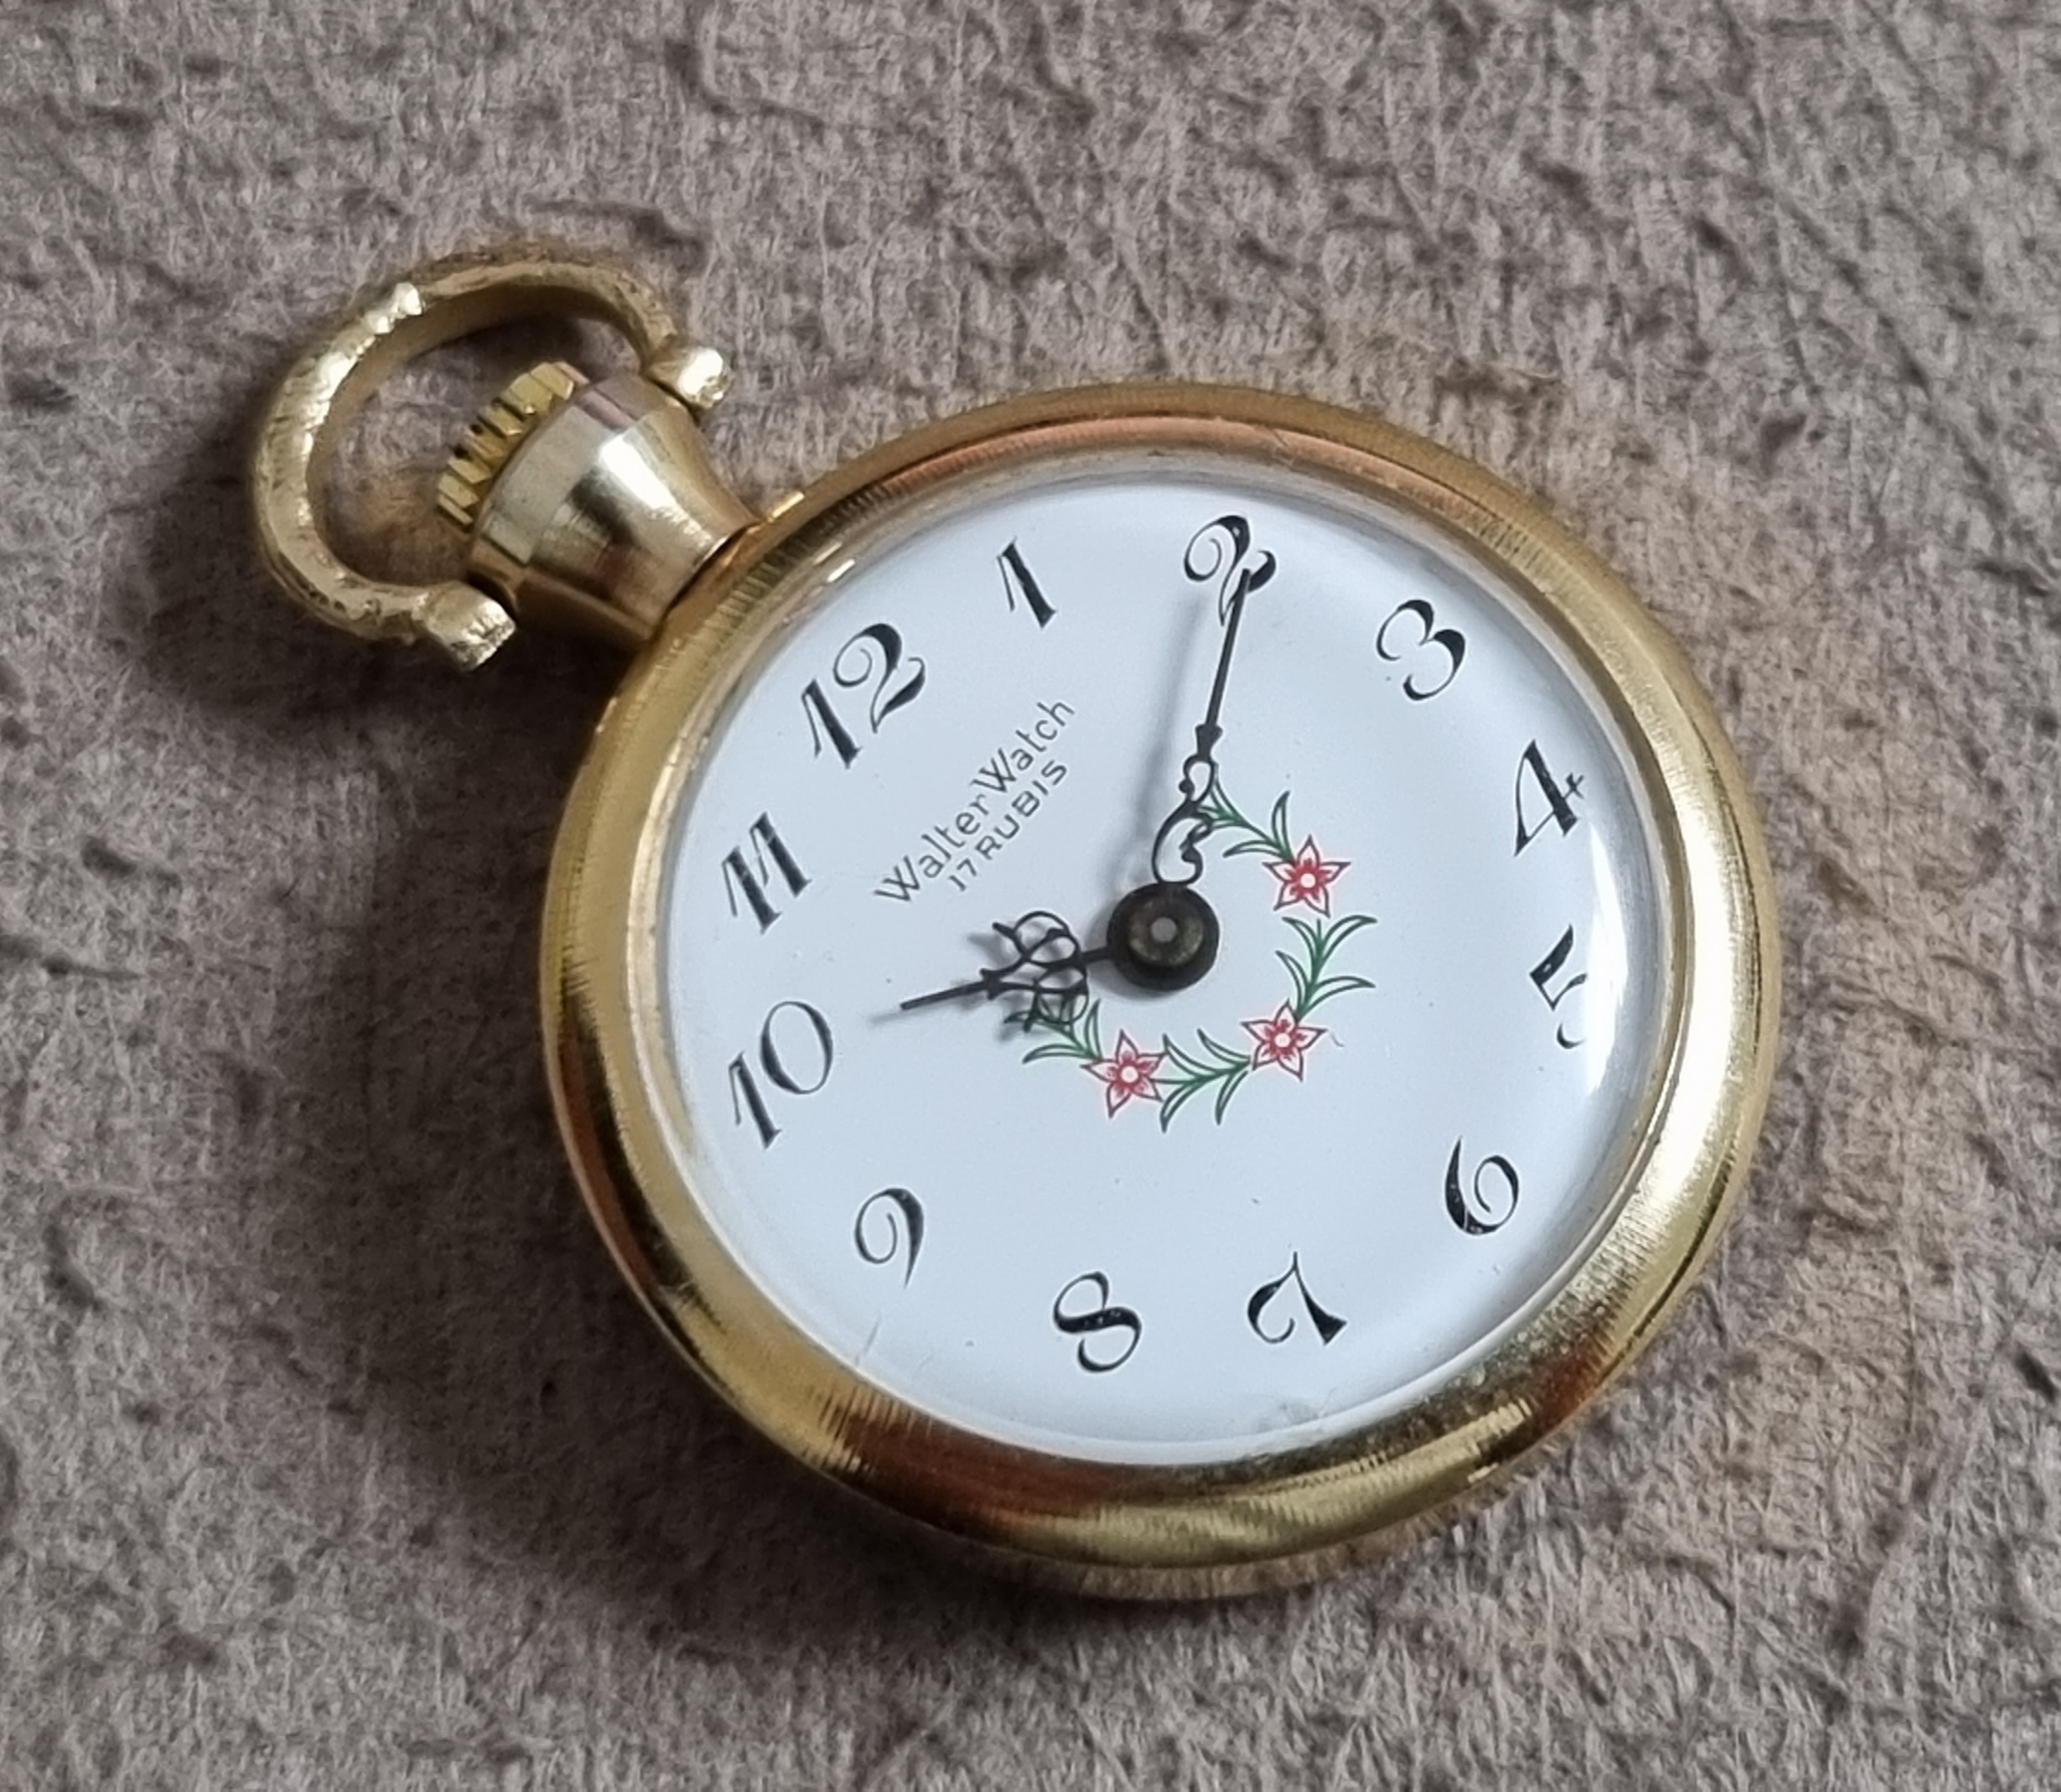 Anonimo Walter Watch Vintage pocket watch lady white floreal dial and romantic scene | San Giorgio a Cremano